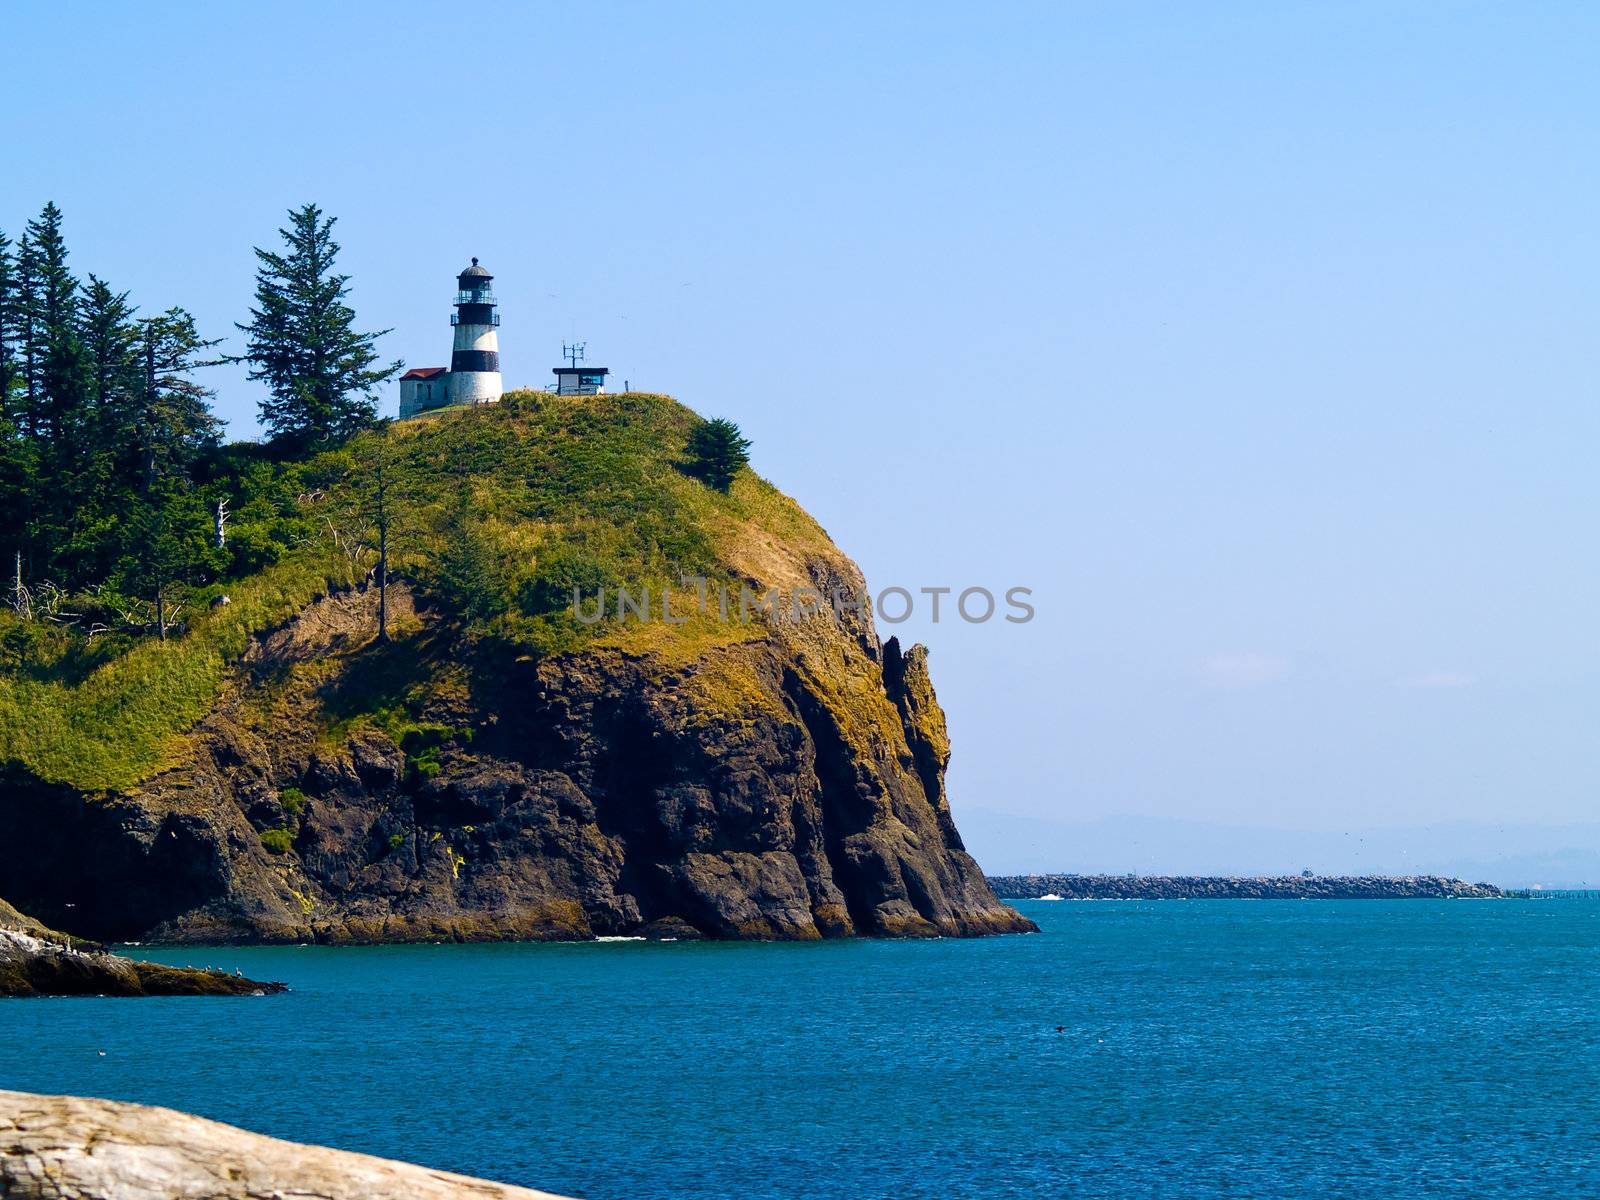 Lighthouse - Cape Disappointment WA USA by Frankljunior